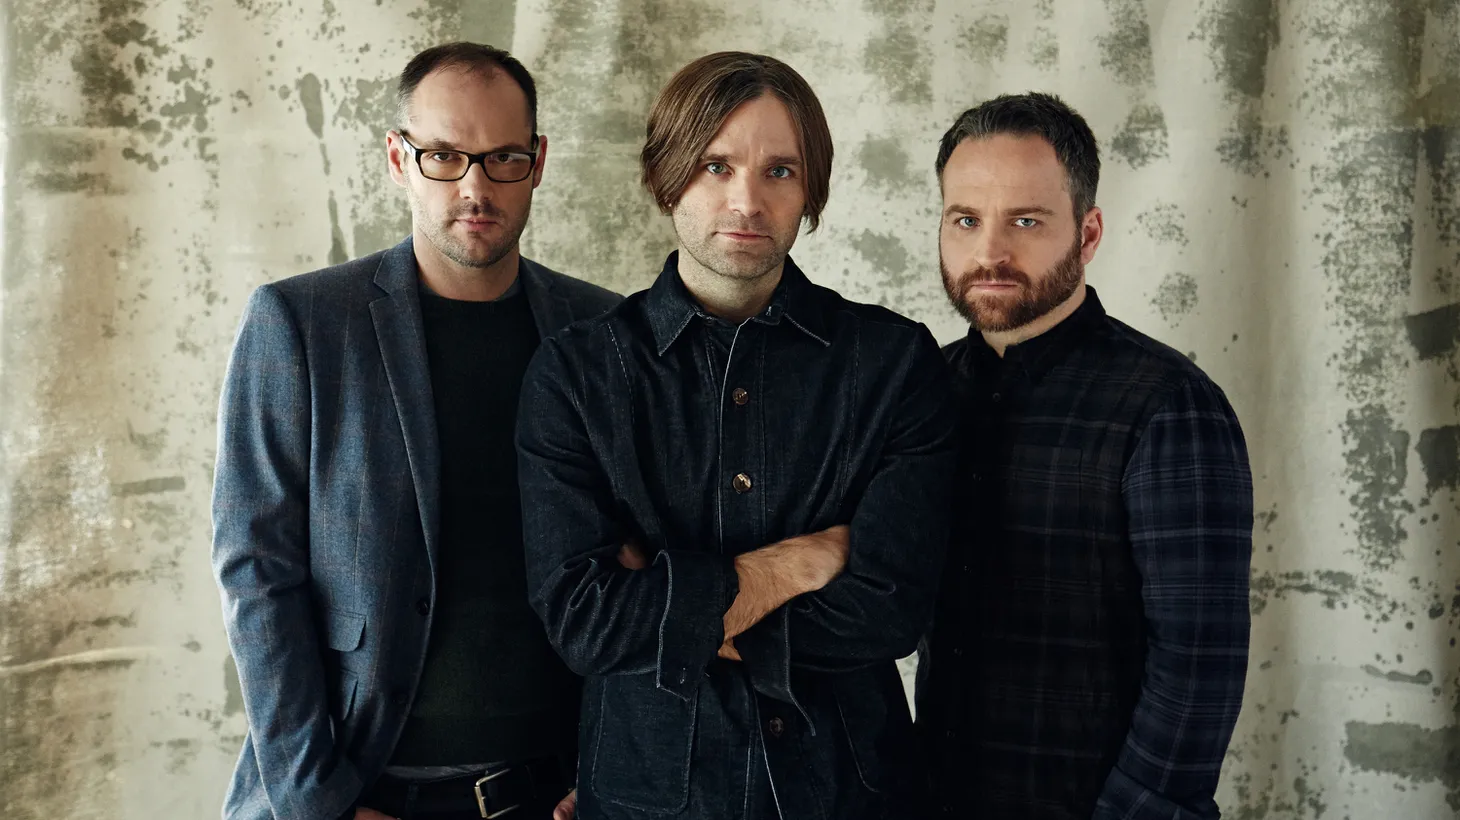 Death Cab for Cutie have been around for almost two decades and are charging forward with their first new album in four years, despite the absence of founding member Chris Walla.